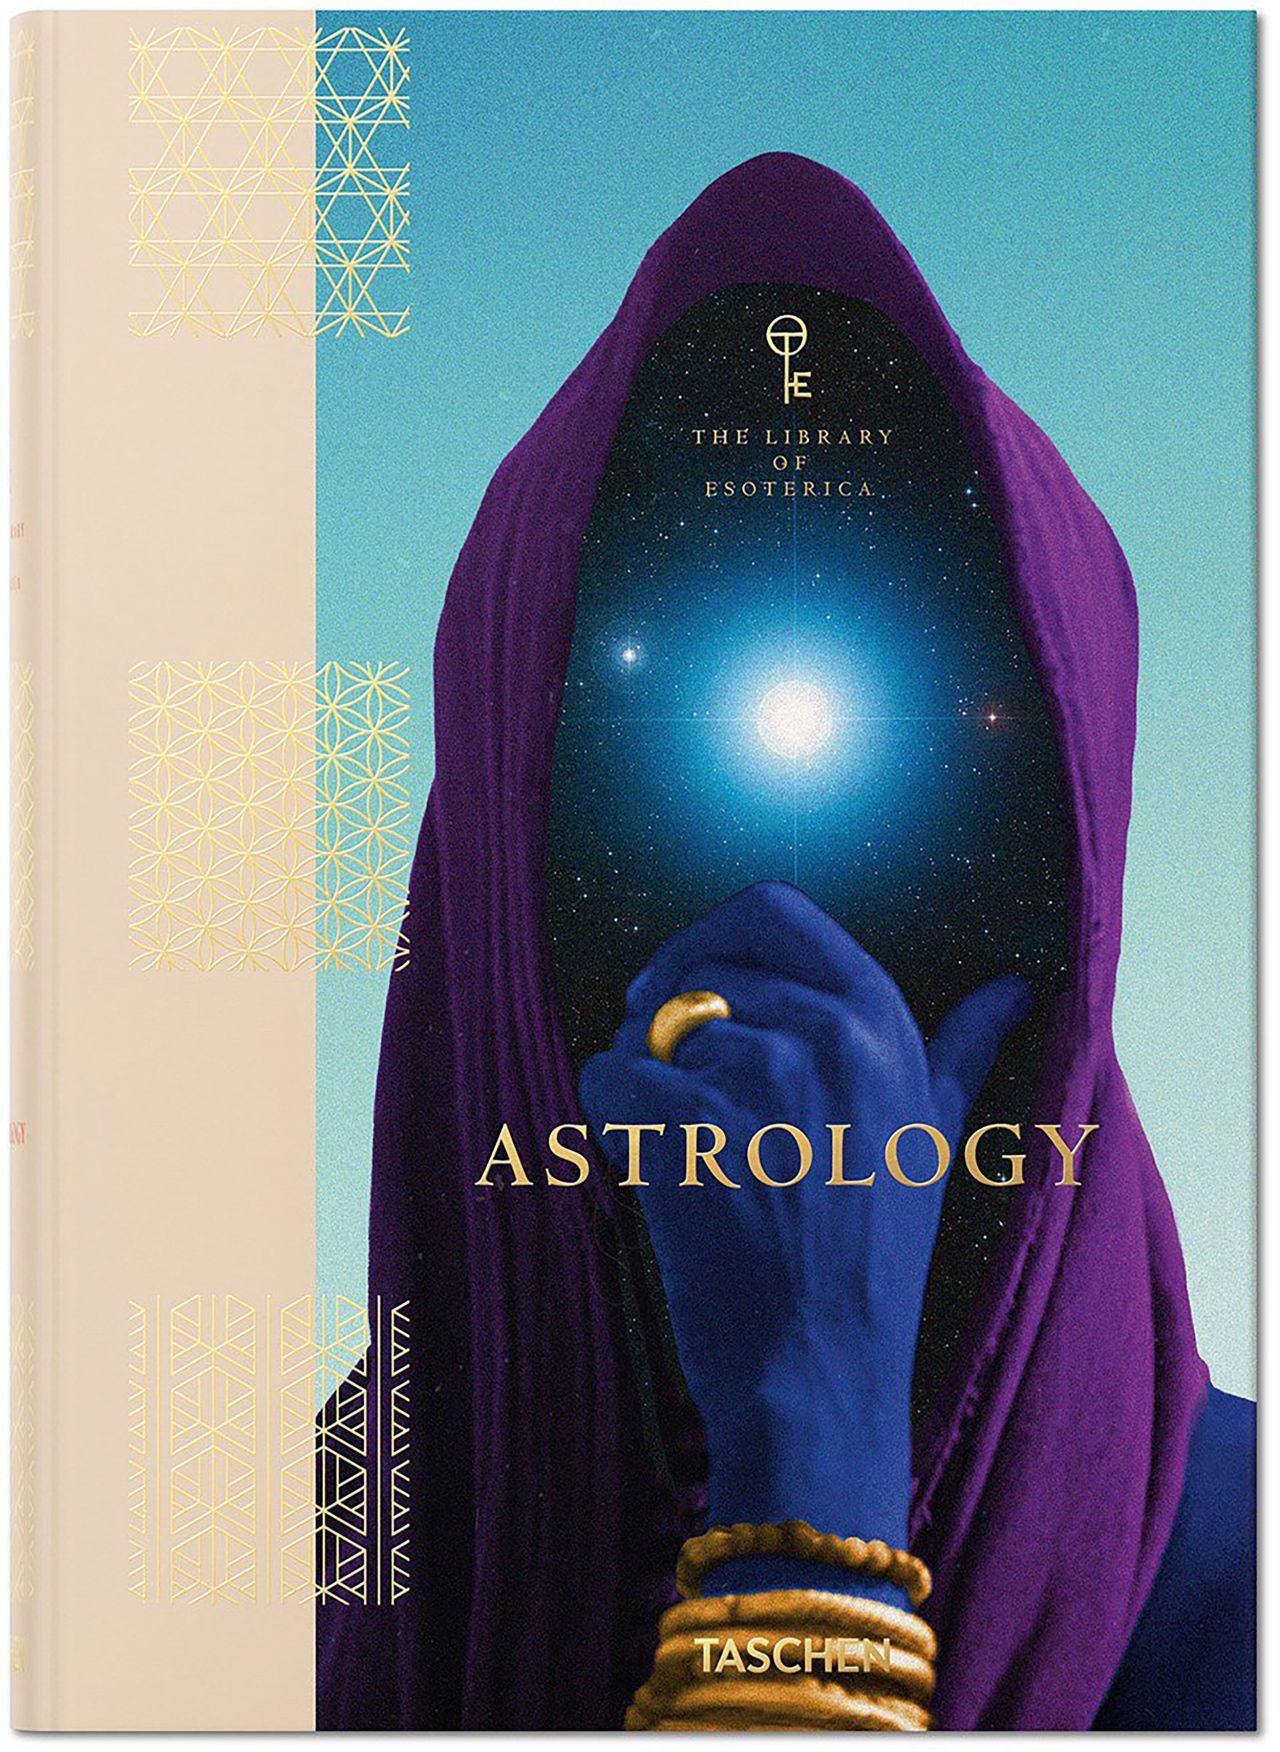 "Astrology" is the second title in Taschen's "Library of Esoterica" series.